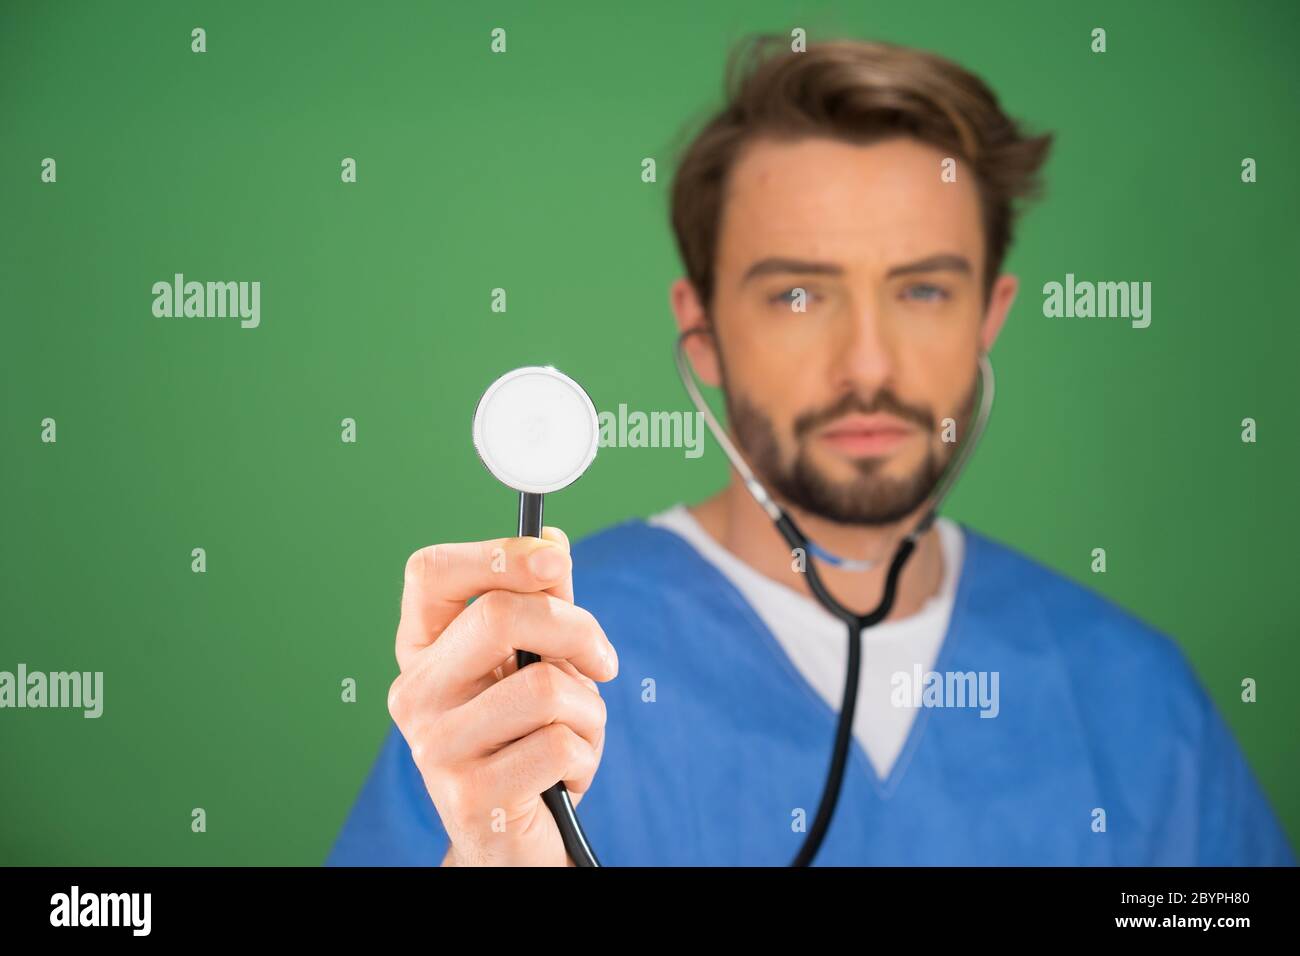 Anaesthetist or doctor holding a stethoscope Stock Photo